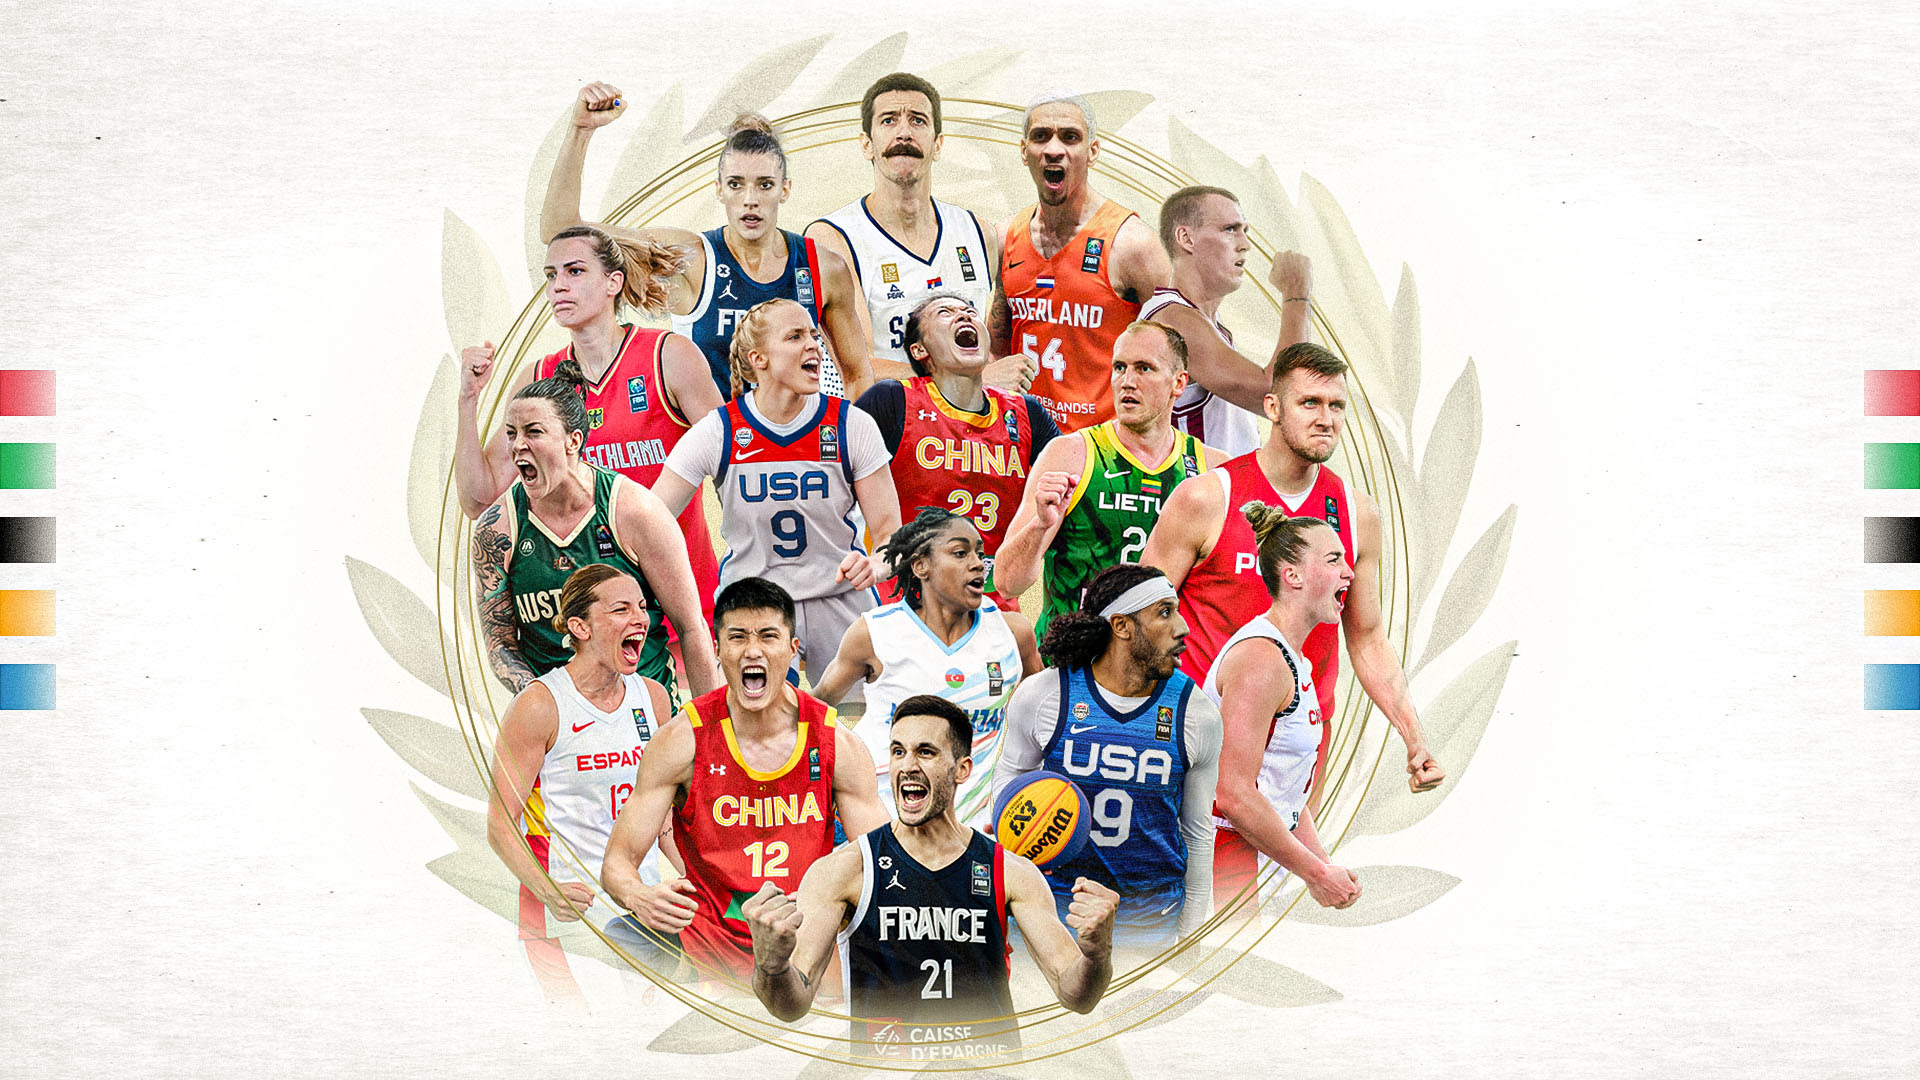 Teams confirmed for Paris 2024 Olympics after last 3x3 Olympic Qualifying Tournament